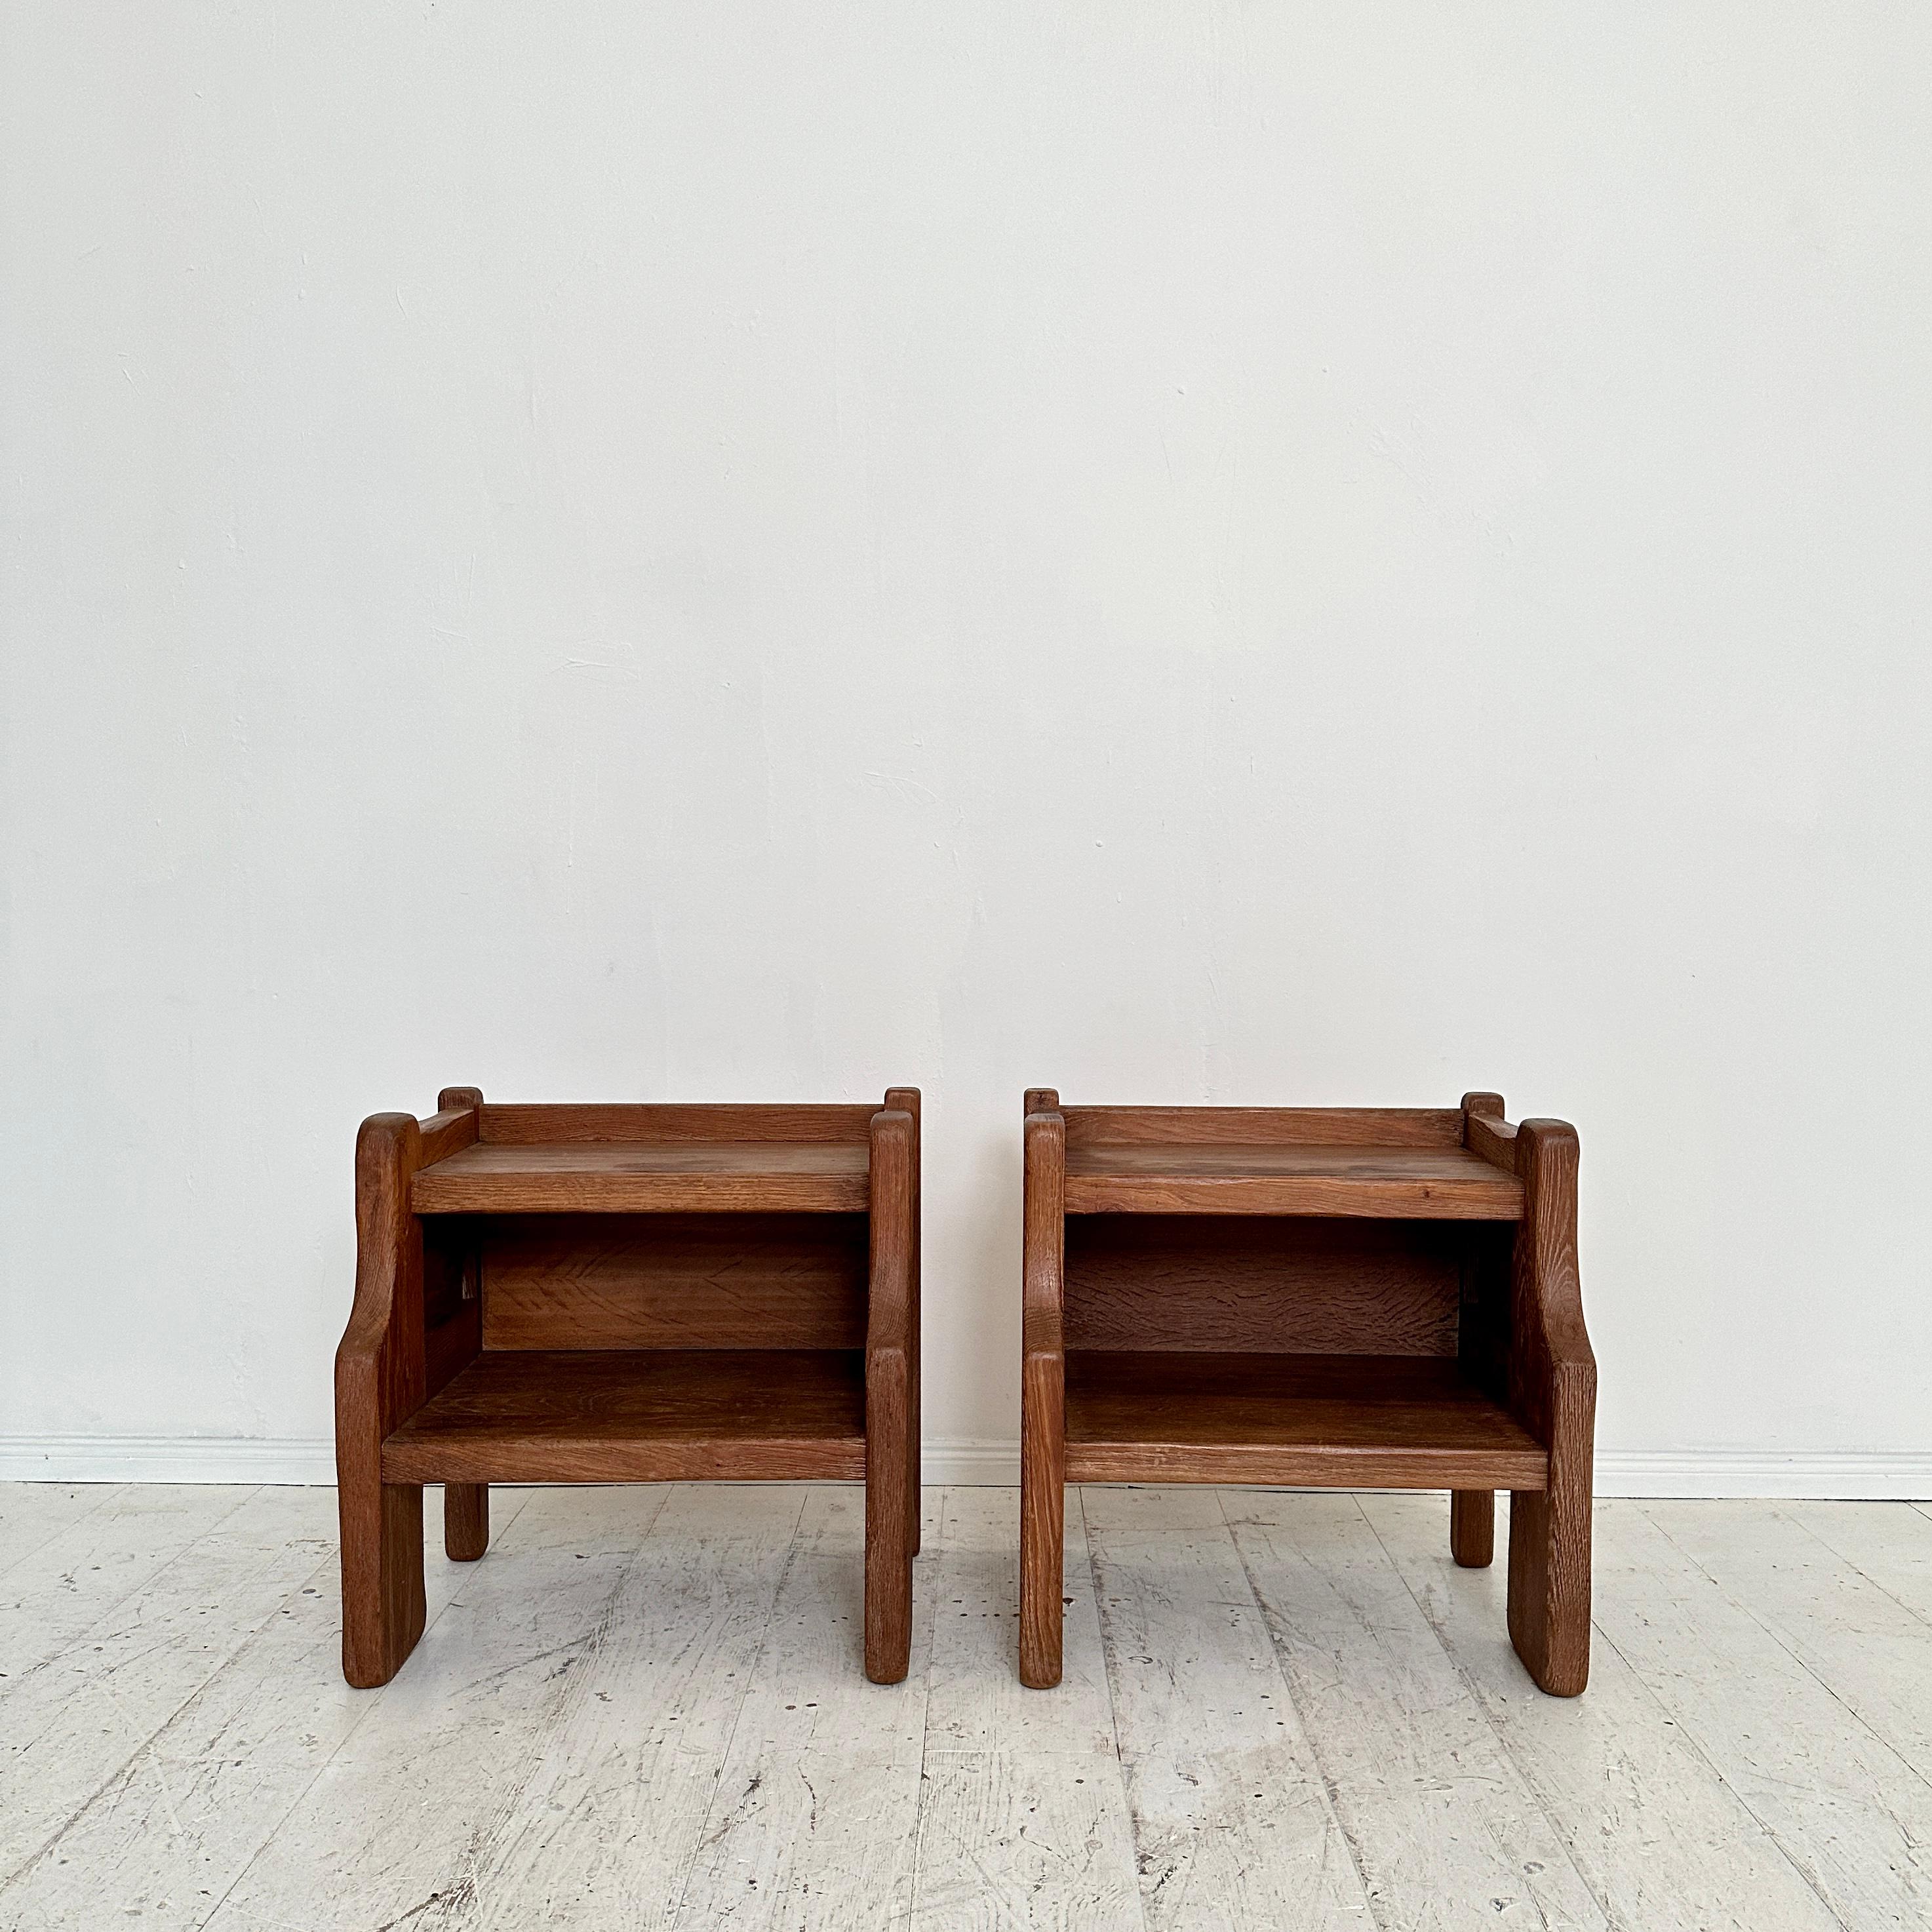 Beautiful Pair of Brutalist Night Stands in washed Oak by de Puydt made ca. 1974 in Belgium.
Fantastic original condition.
A unique piece which is a great eye-catcher for your antique, modern, space age or mid-century interior.
If you have any more